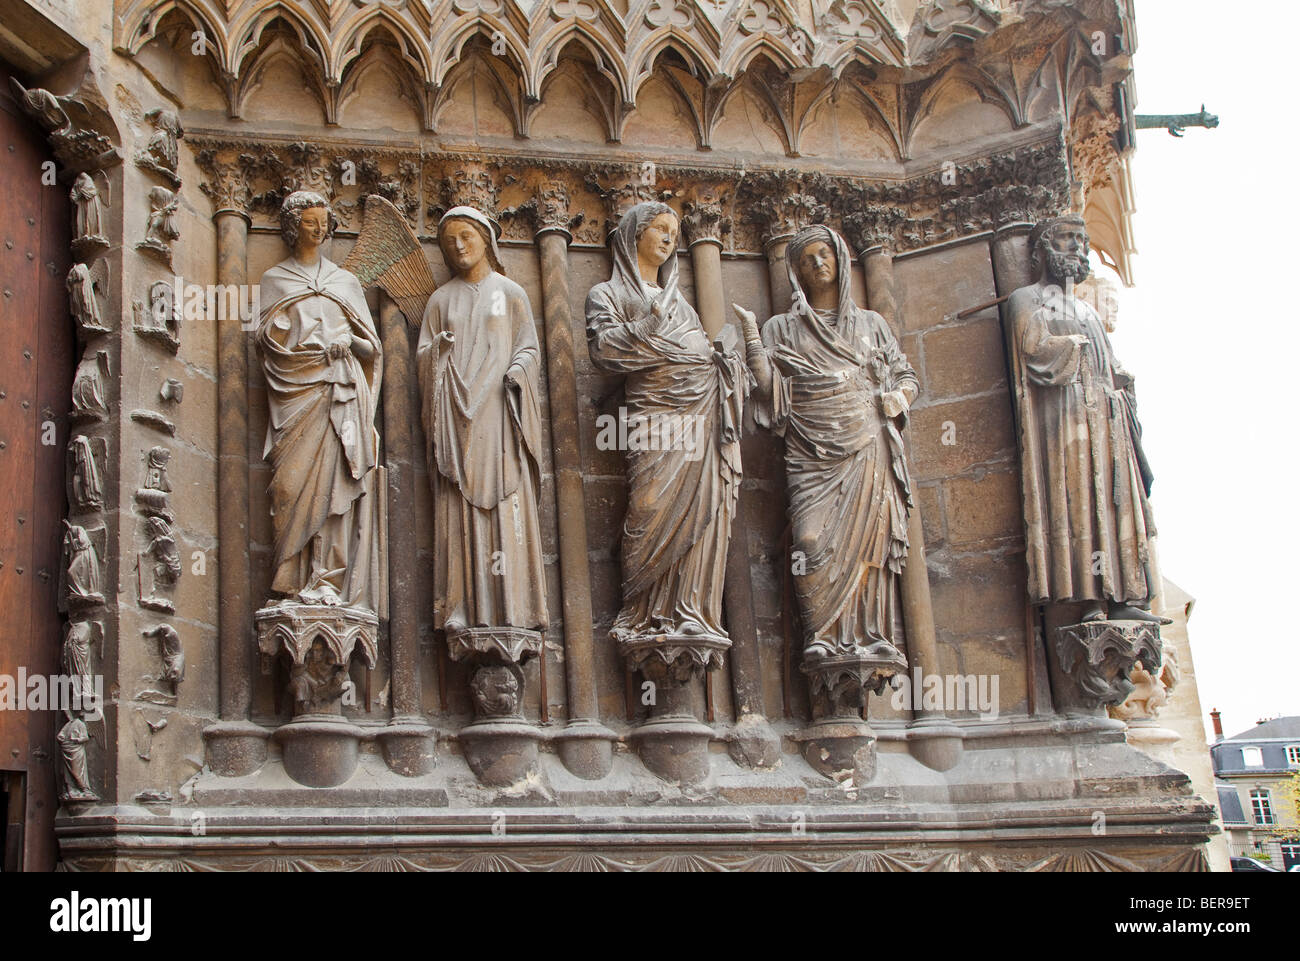 Rheims Cathedral (Cathedrale de Reims) details of sculpture in Champagne  Ardenne Region France.098613 Reims Stock Photo - Alamy